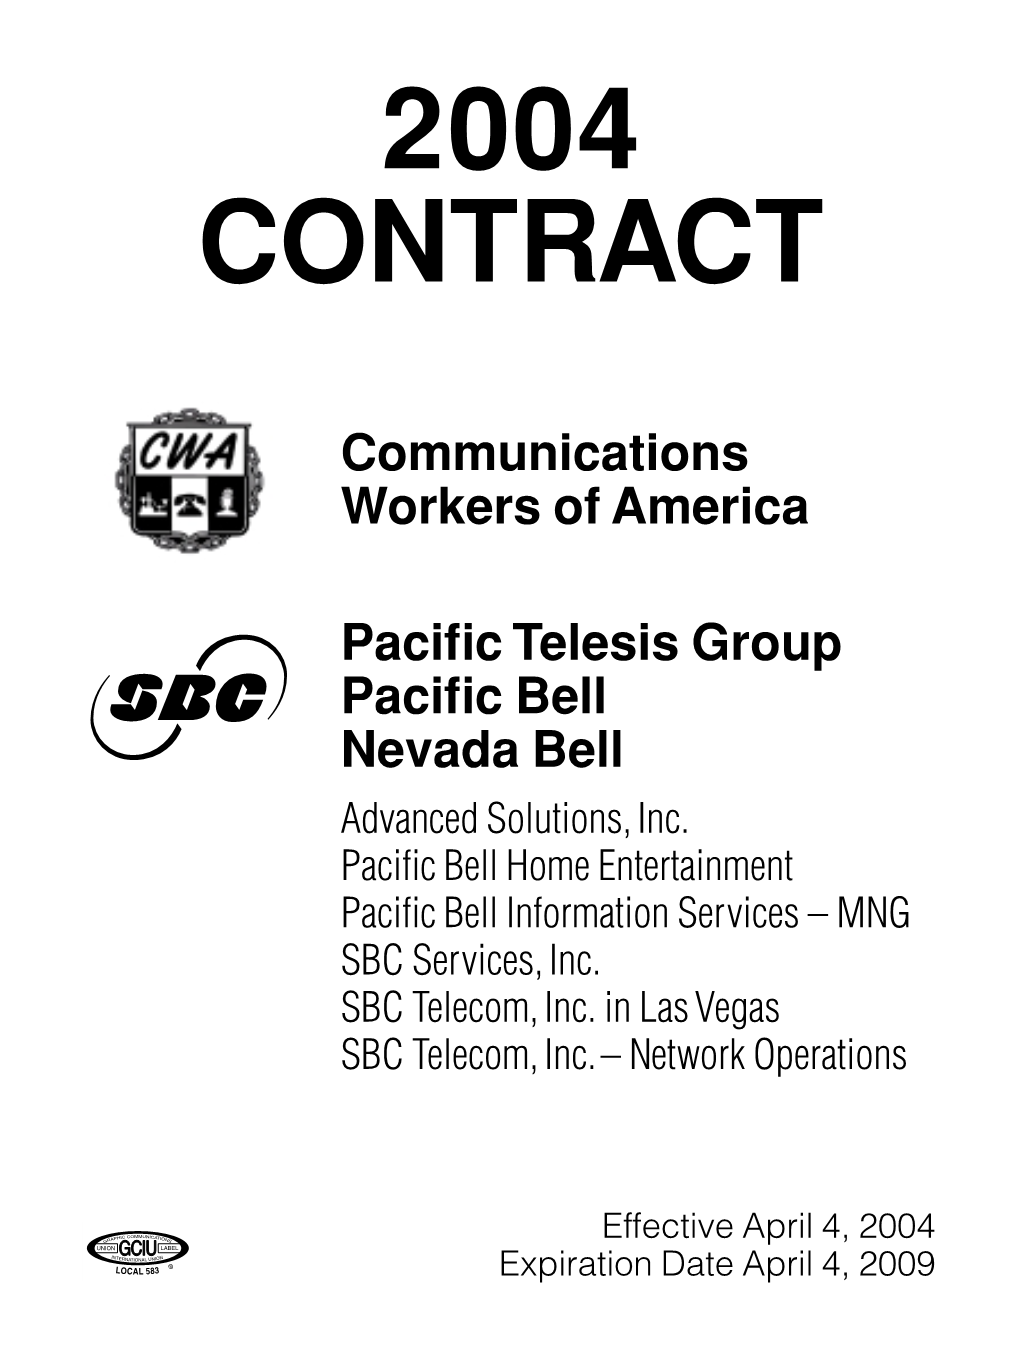 2004 Contract